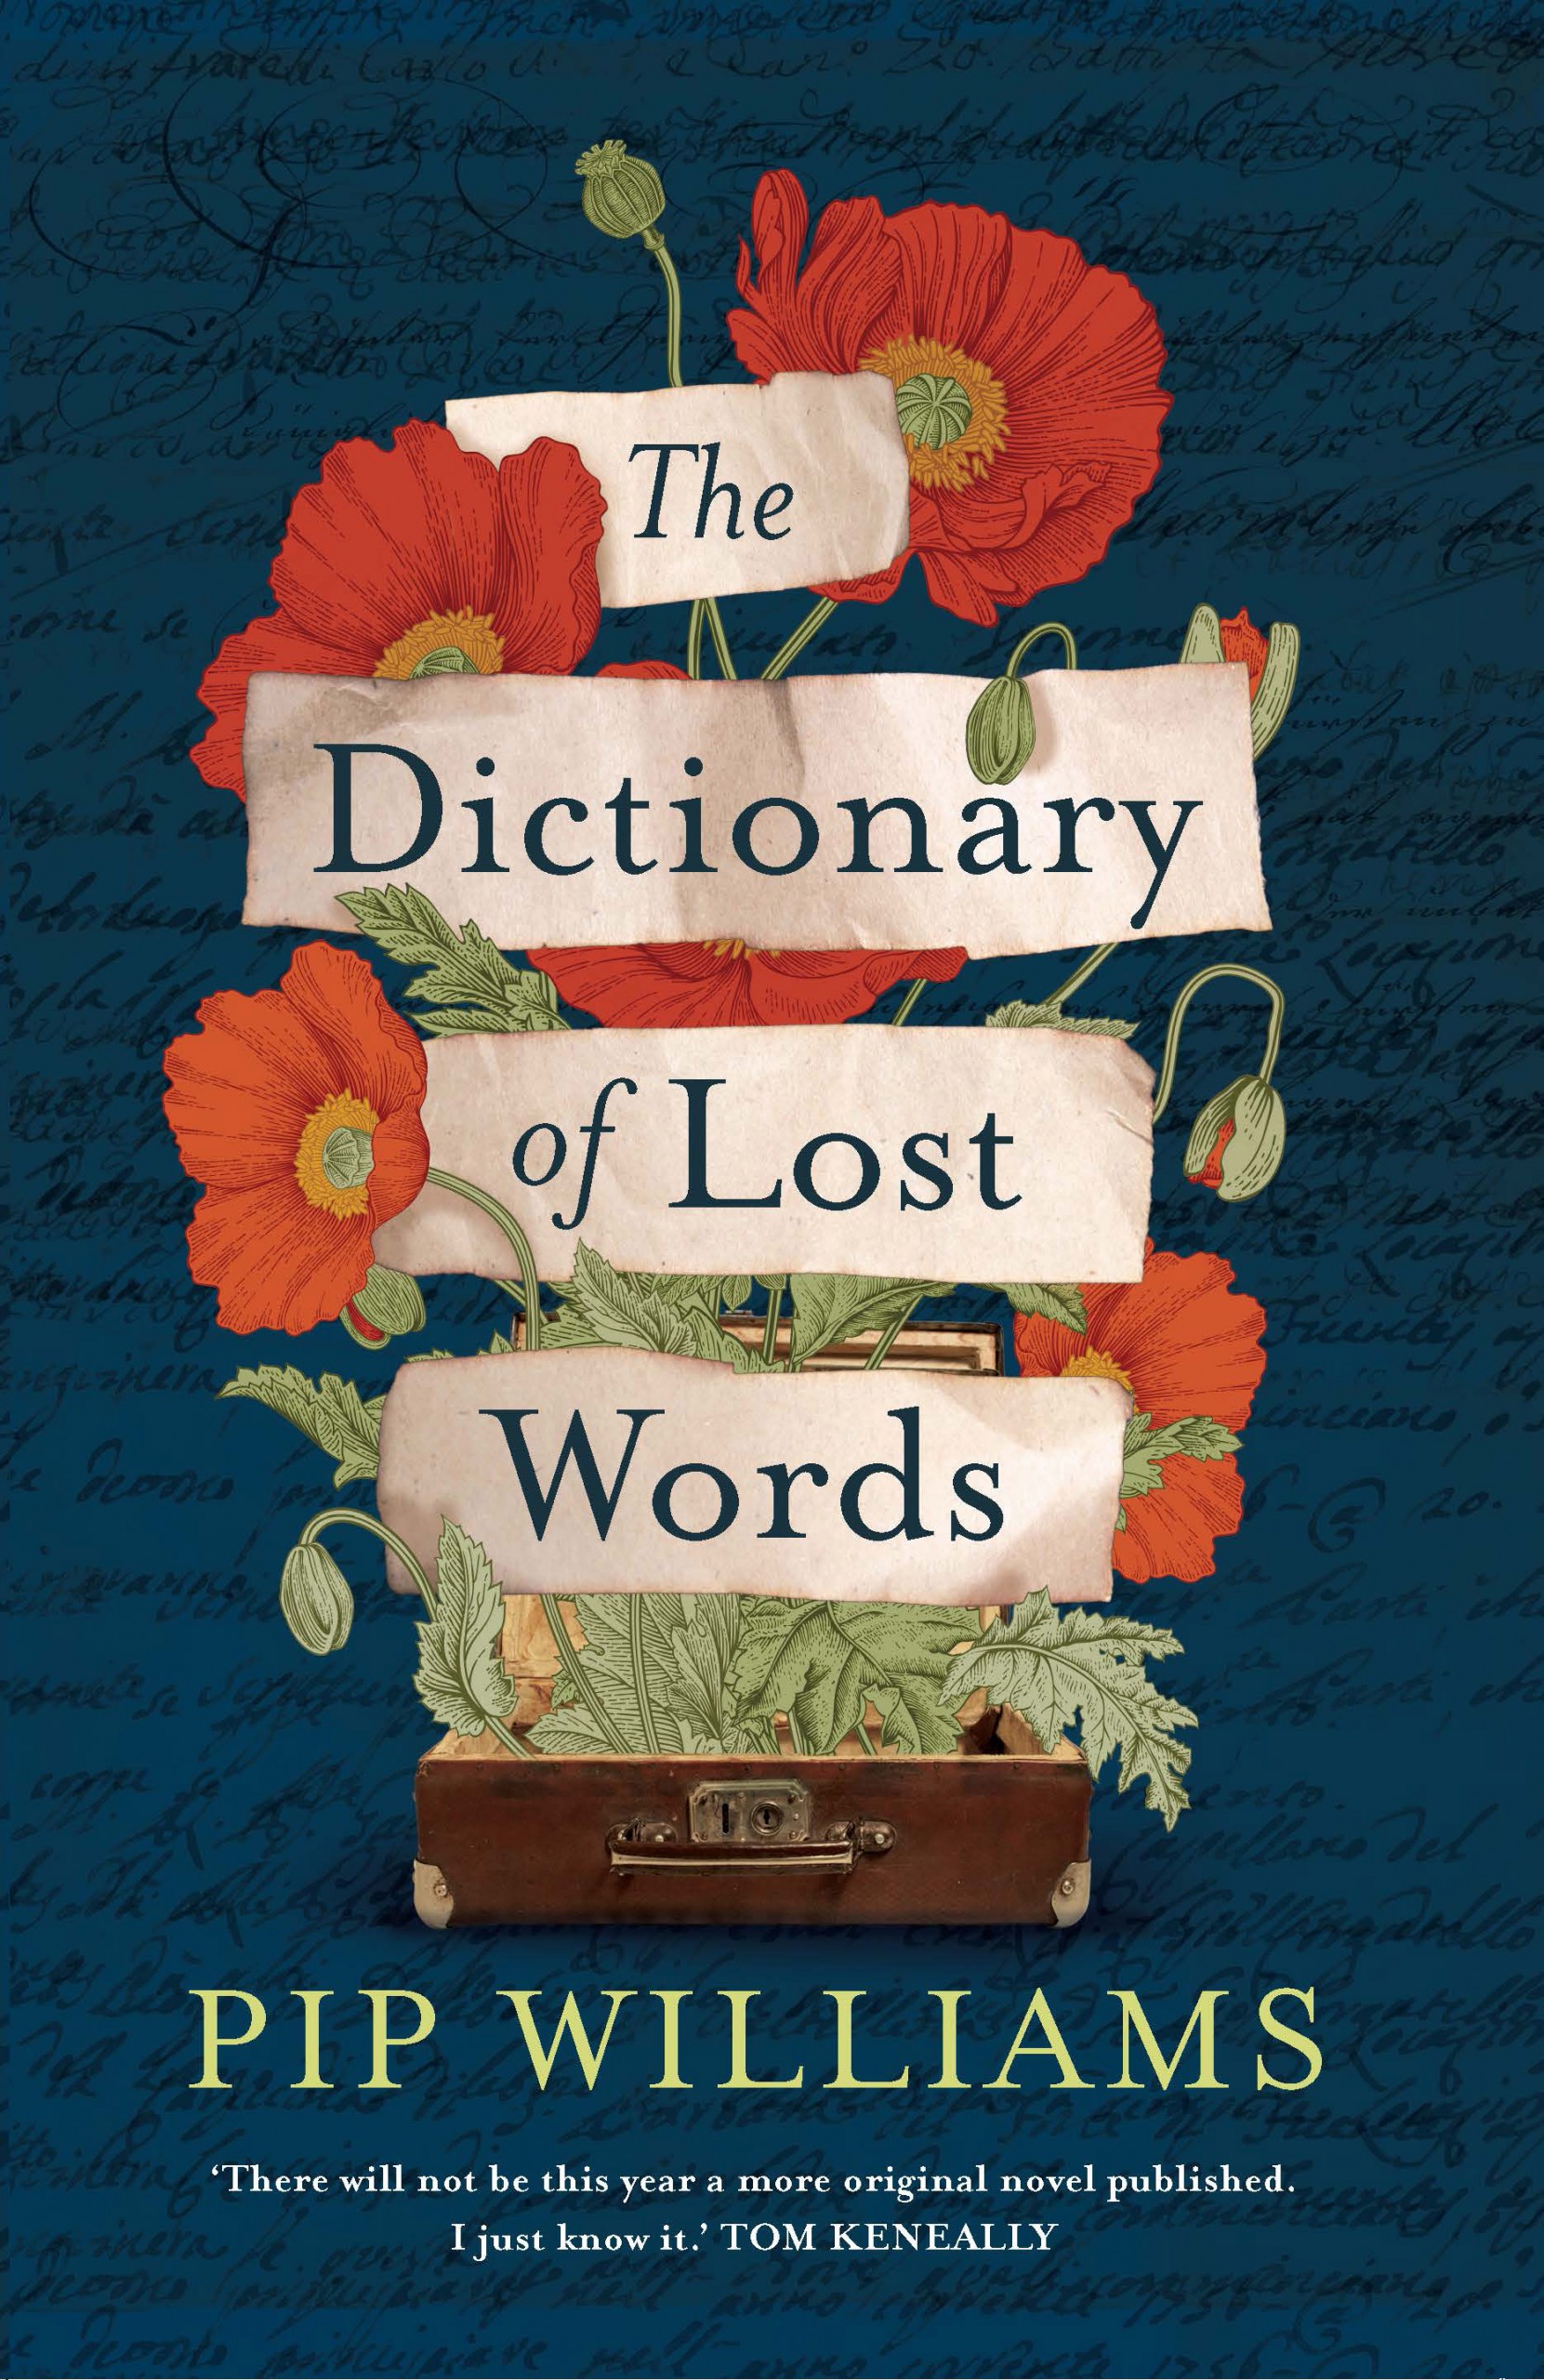 The book cover of The Dictionary of Lost Words by Pip Williams with a plant bursting out of a suitcase